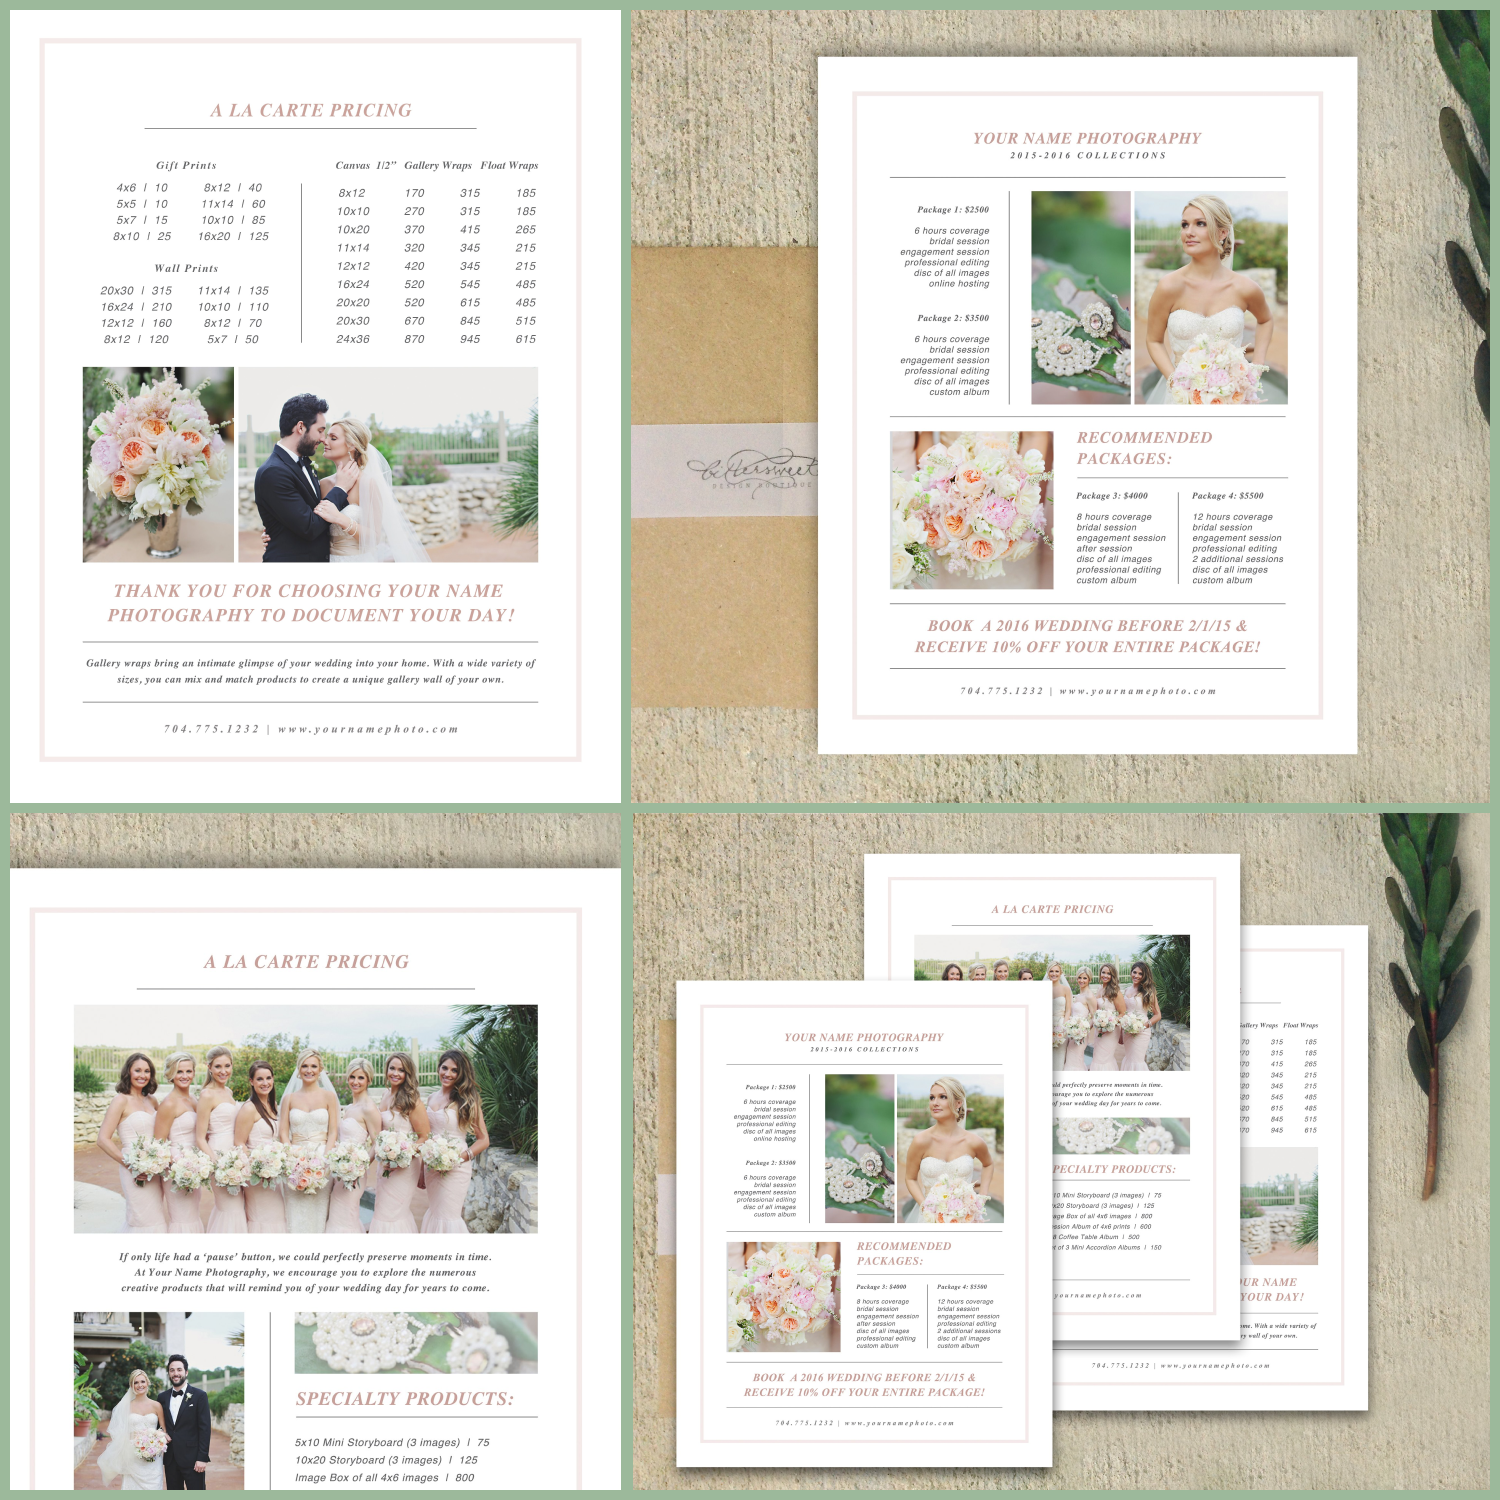 Preview wedding pricing guide set.